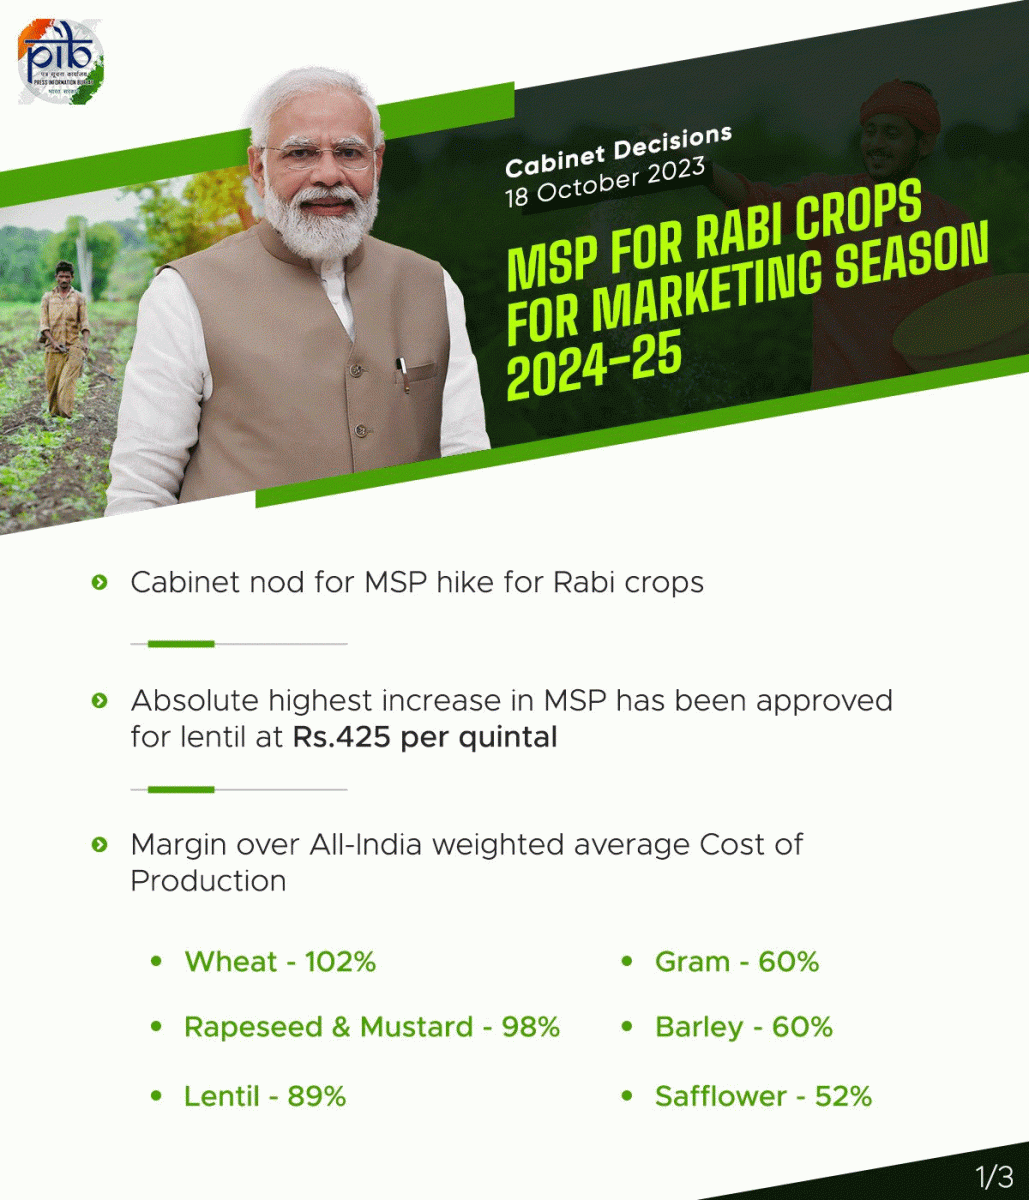  Central Govt Approves Rabi Crops MSP Increased For Marketing Season 2024-25 